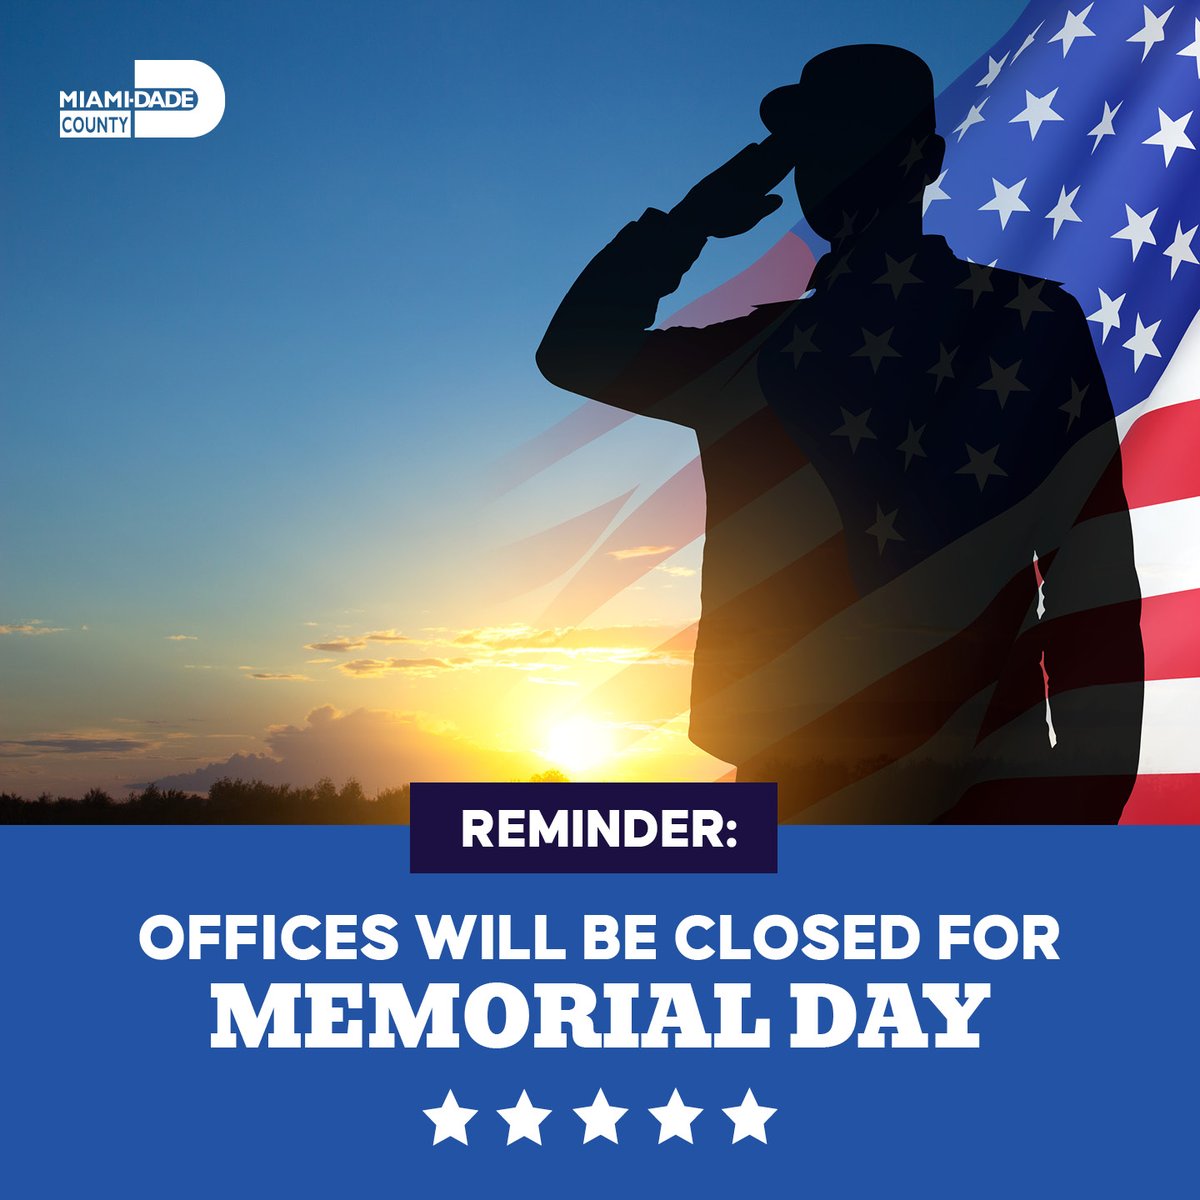 In observance of #MemorialDay, #OurCounty offices will be closed on Monday, May 27. For more information on services, events, and safety tips, visit miamidade.gov/memorial-day-g….